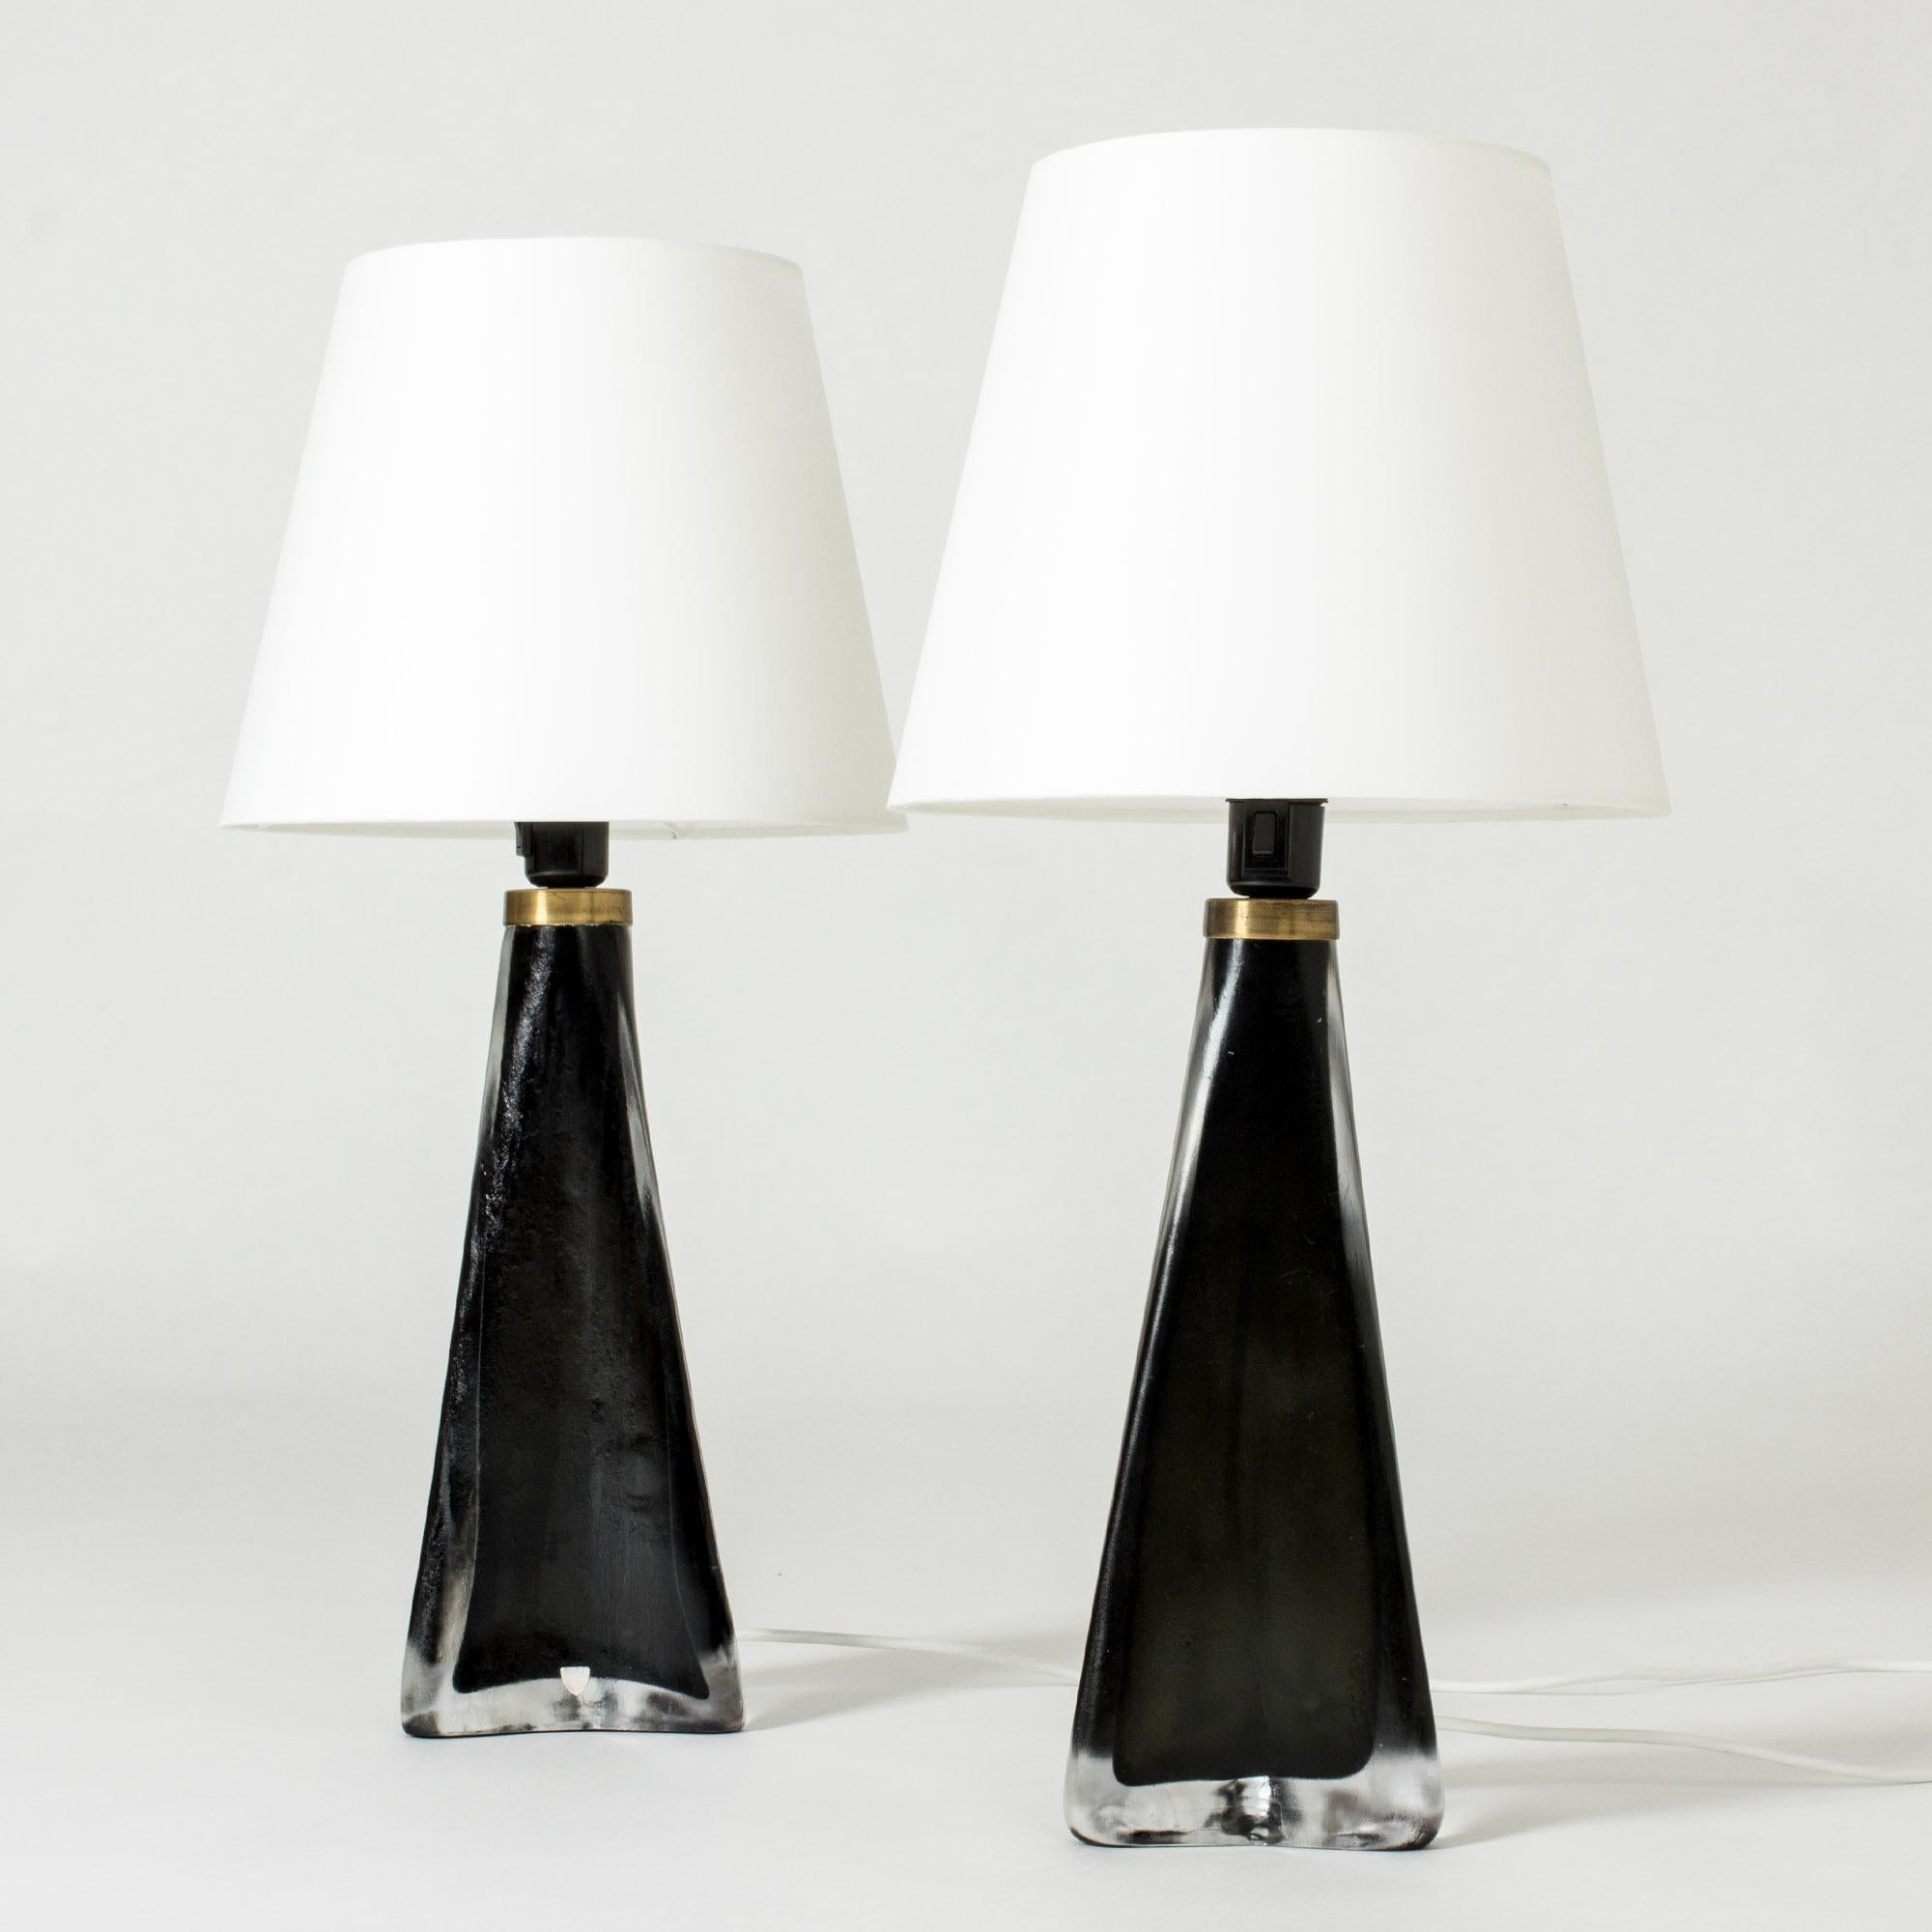 Pair of cool and luxurious table lamps by Carl Fagerlund, made in striking black and clear glass. Tapering shape with a triangular base. Slightly frosted surface with structure.